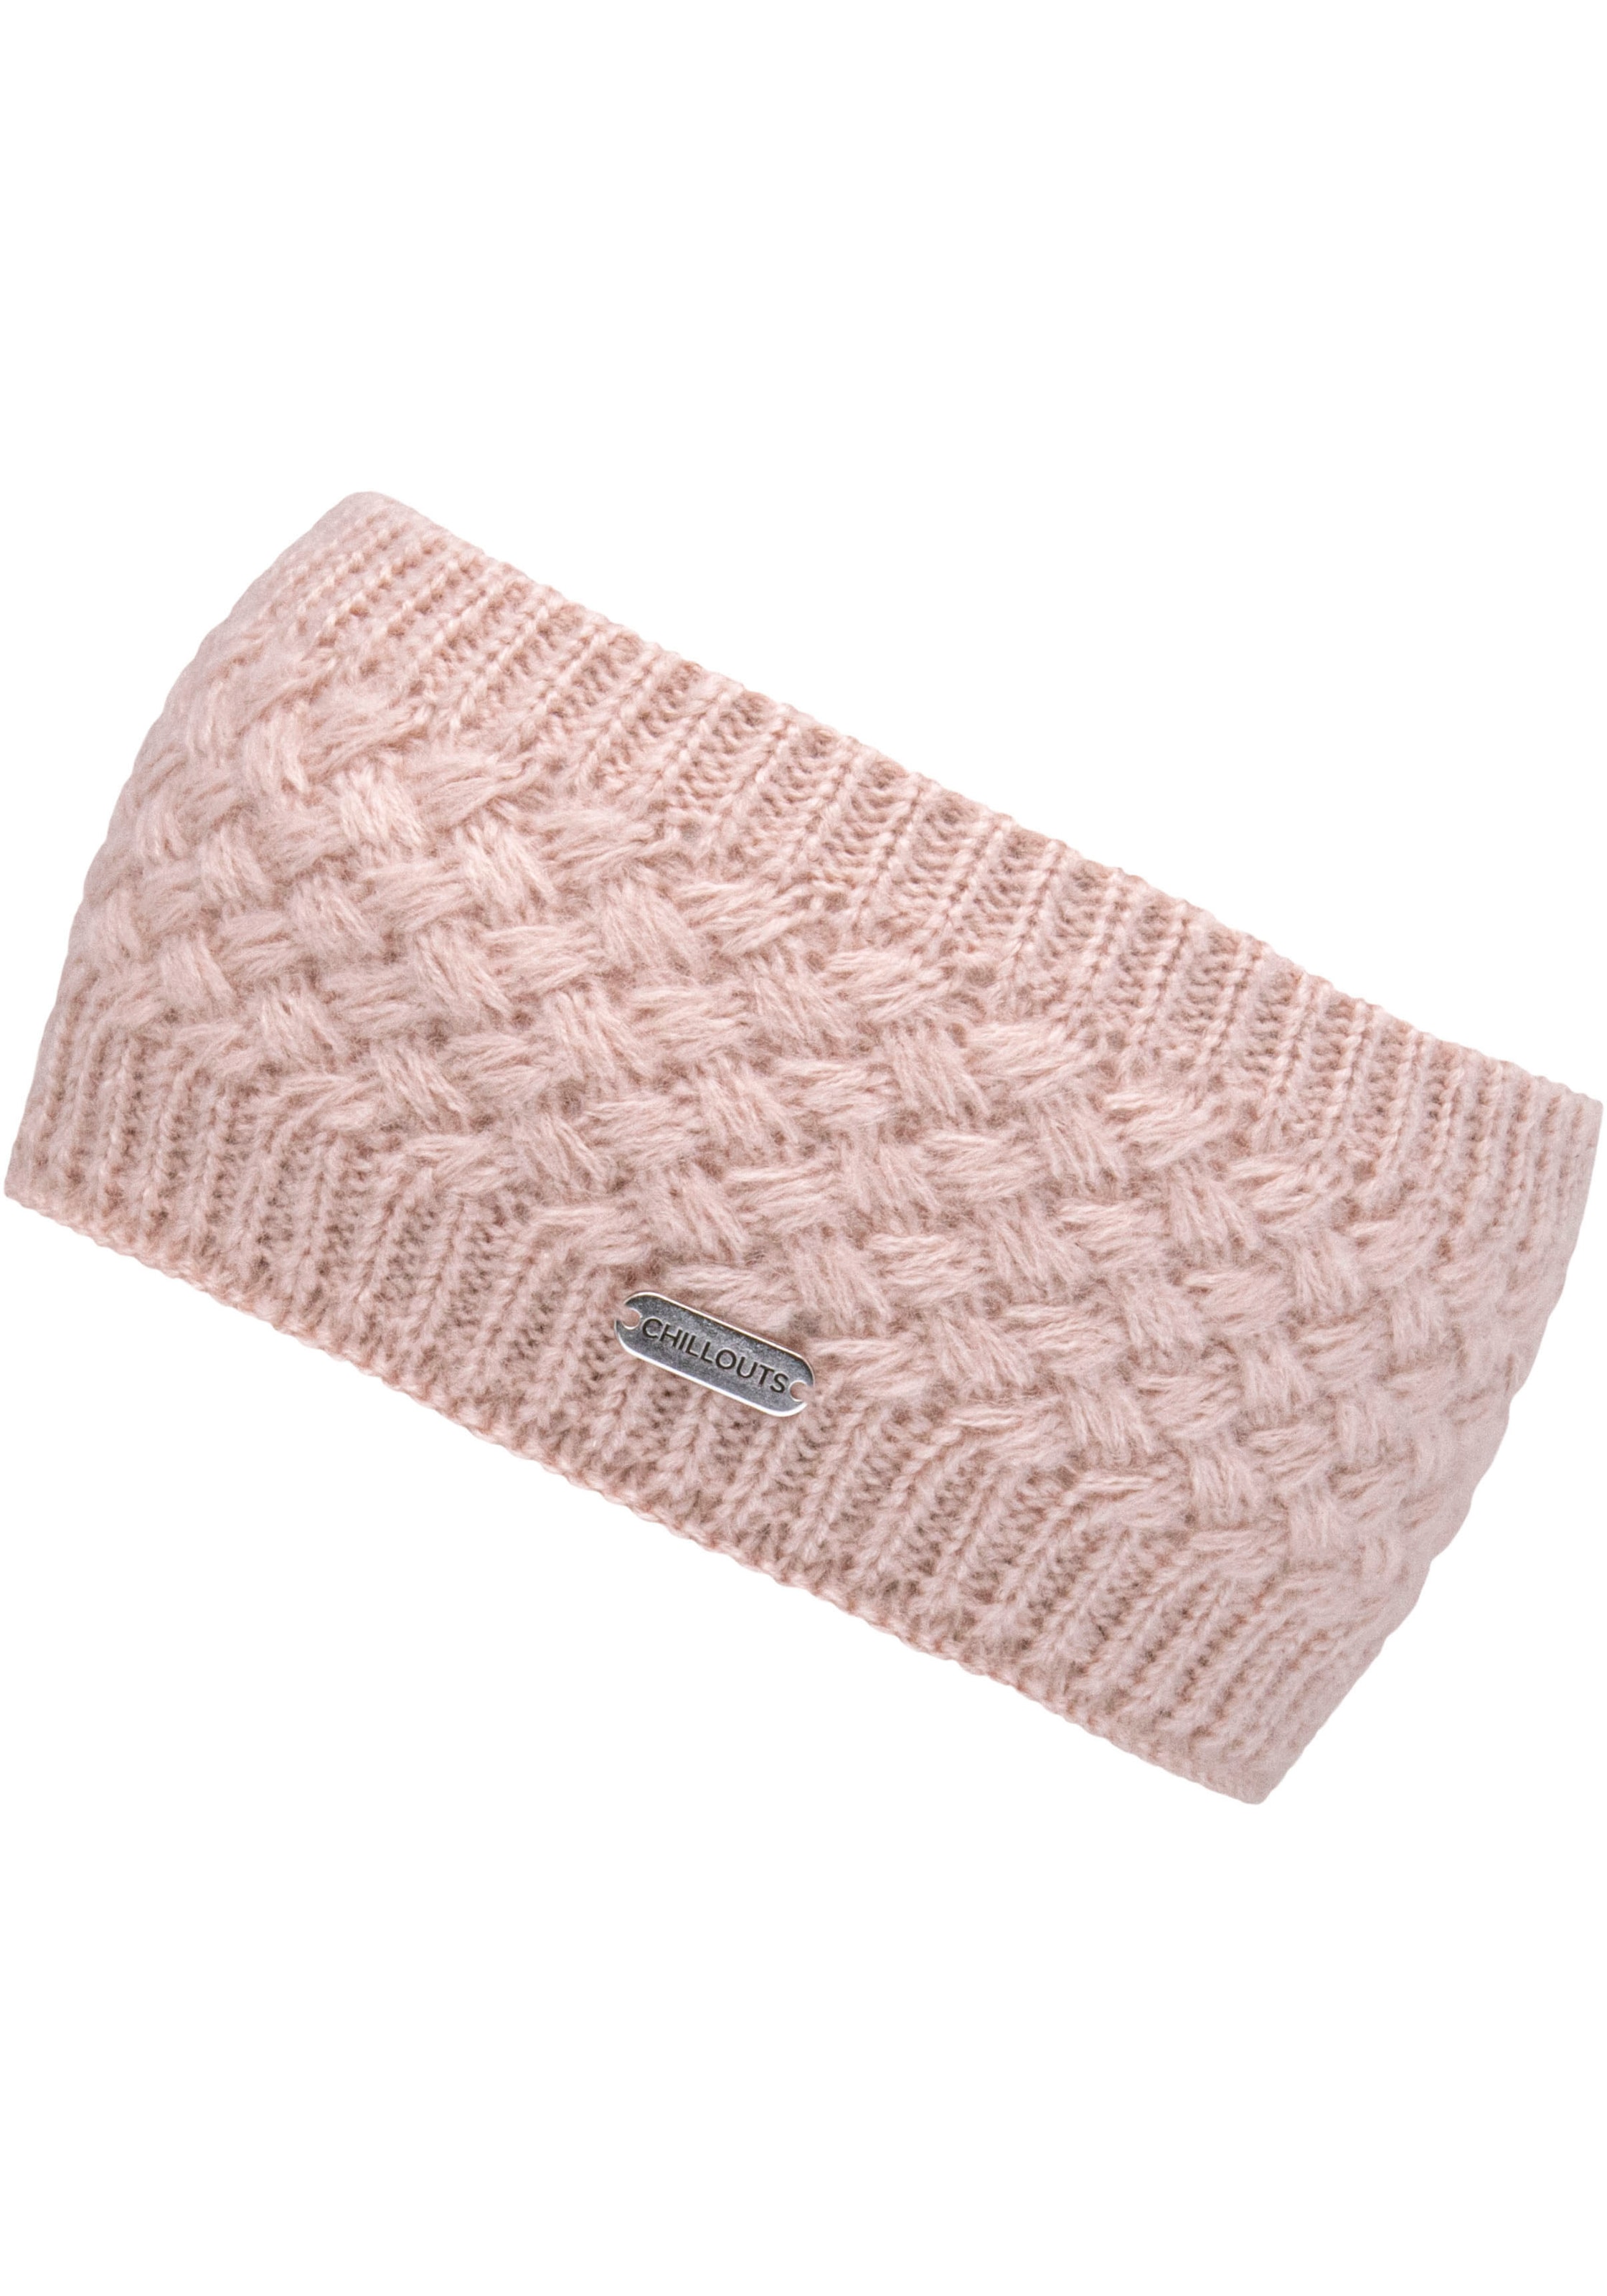 chillouts Stirnband »Felicitas Headband«, Metall-Label